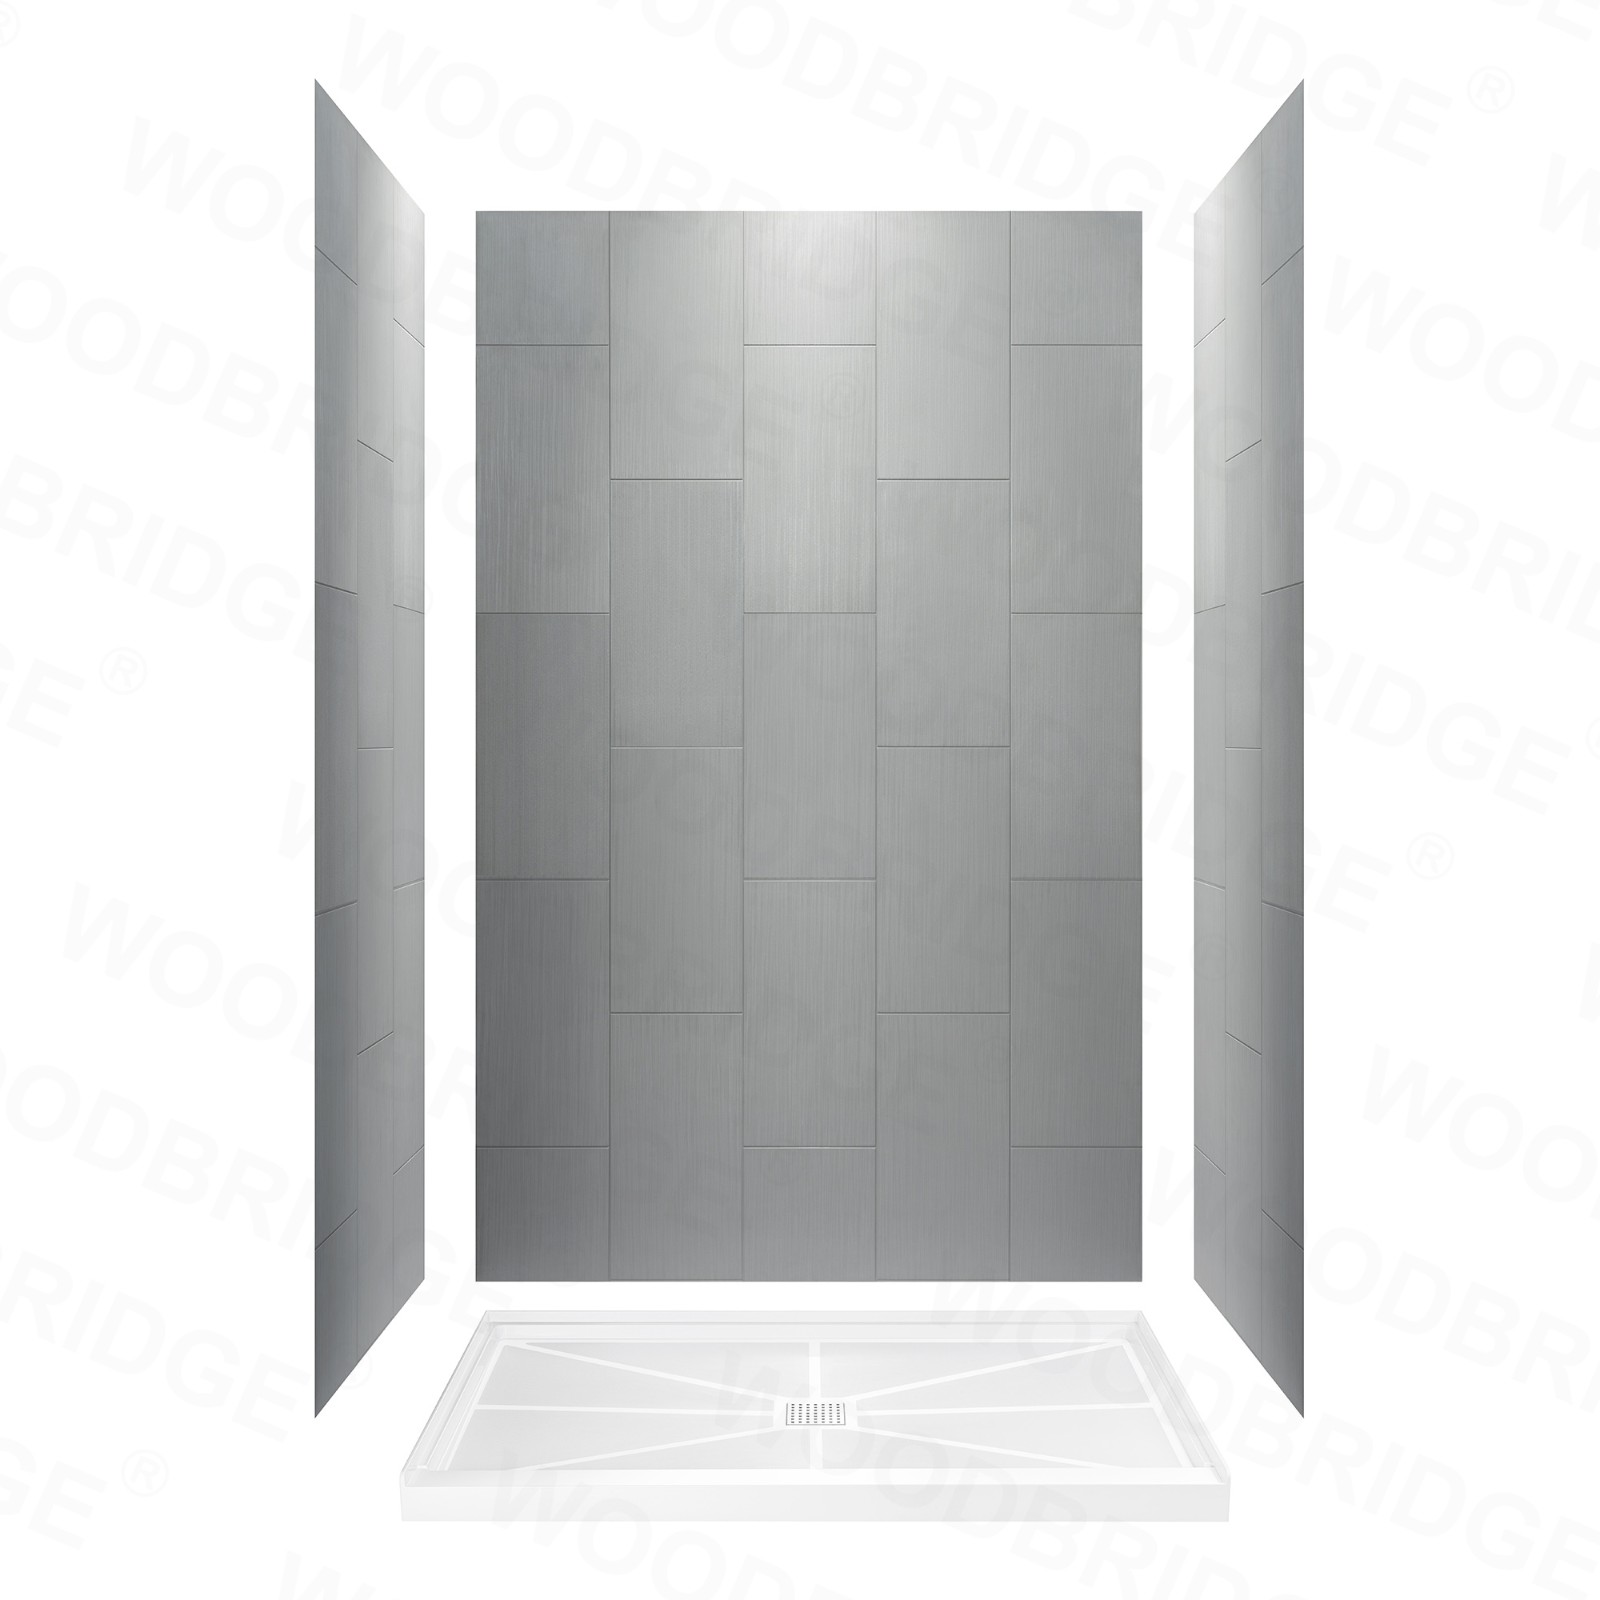  WOODBRIDGE Solid Surface 3-Panel Shower Wall Kit, 36-in L x 60-in W x 96-in H, Stacked Block in a Staggered Vertical Pattern. Matte Grey Finish_5279